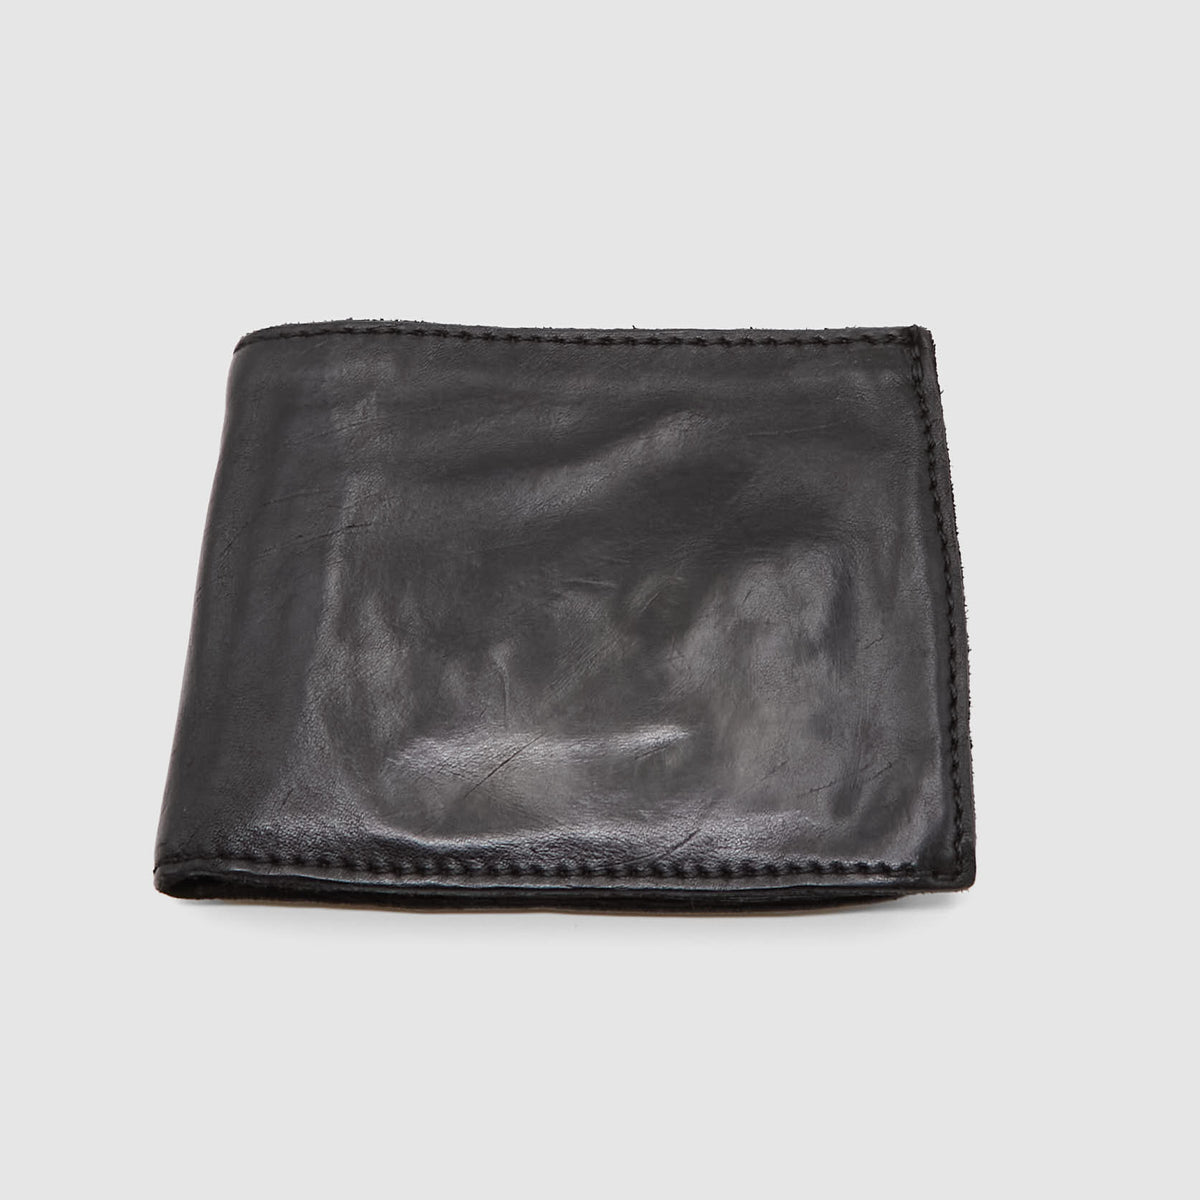 Campomaggi Horizontal Wallet with Coin Compartment